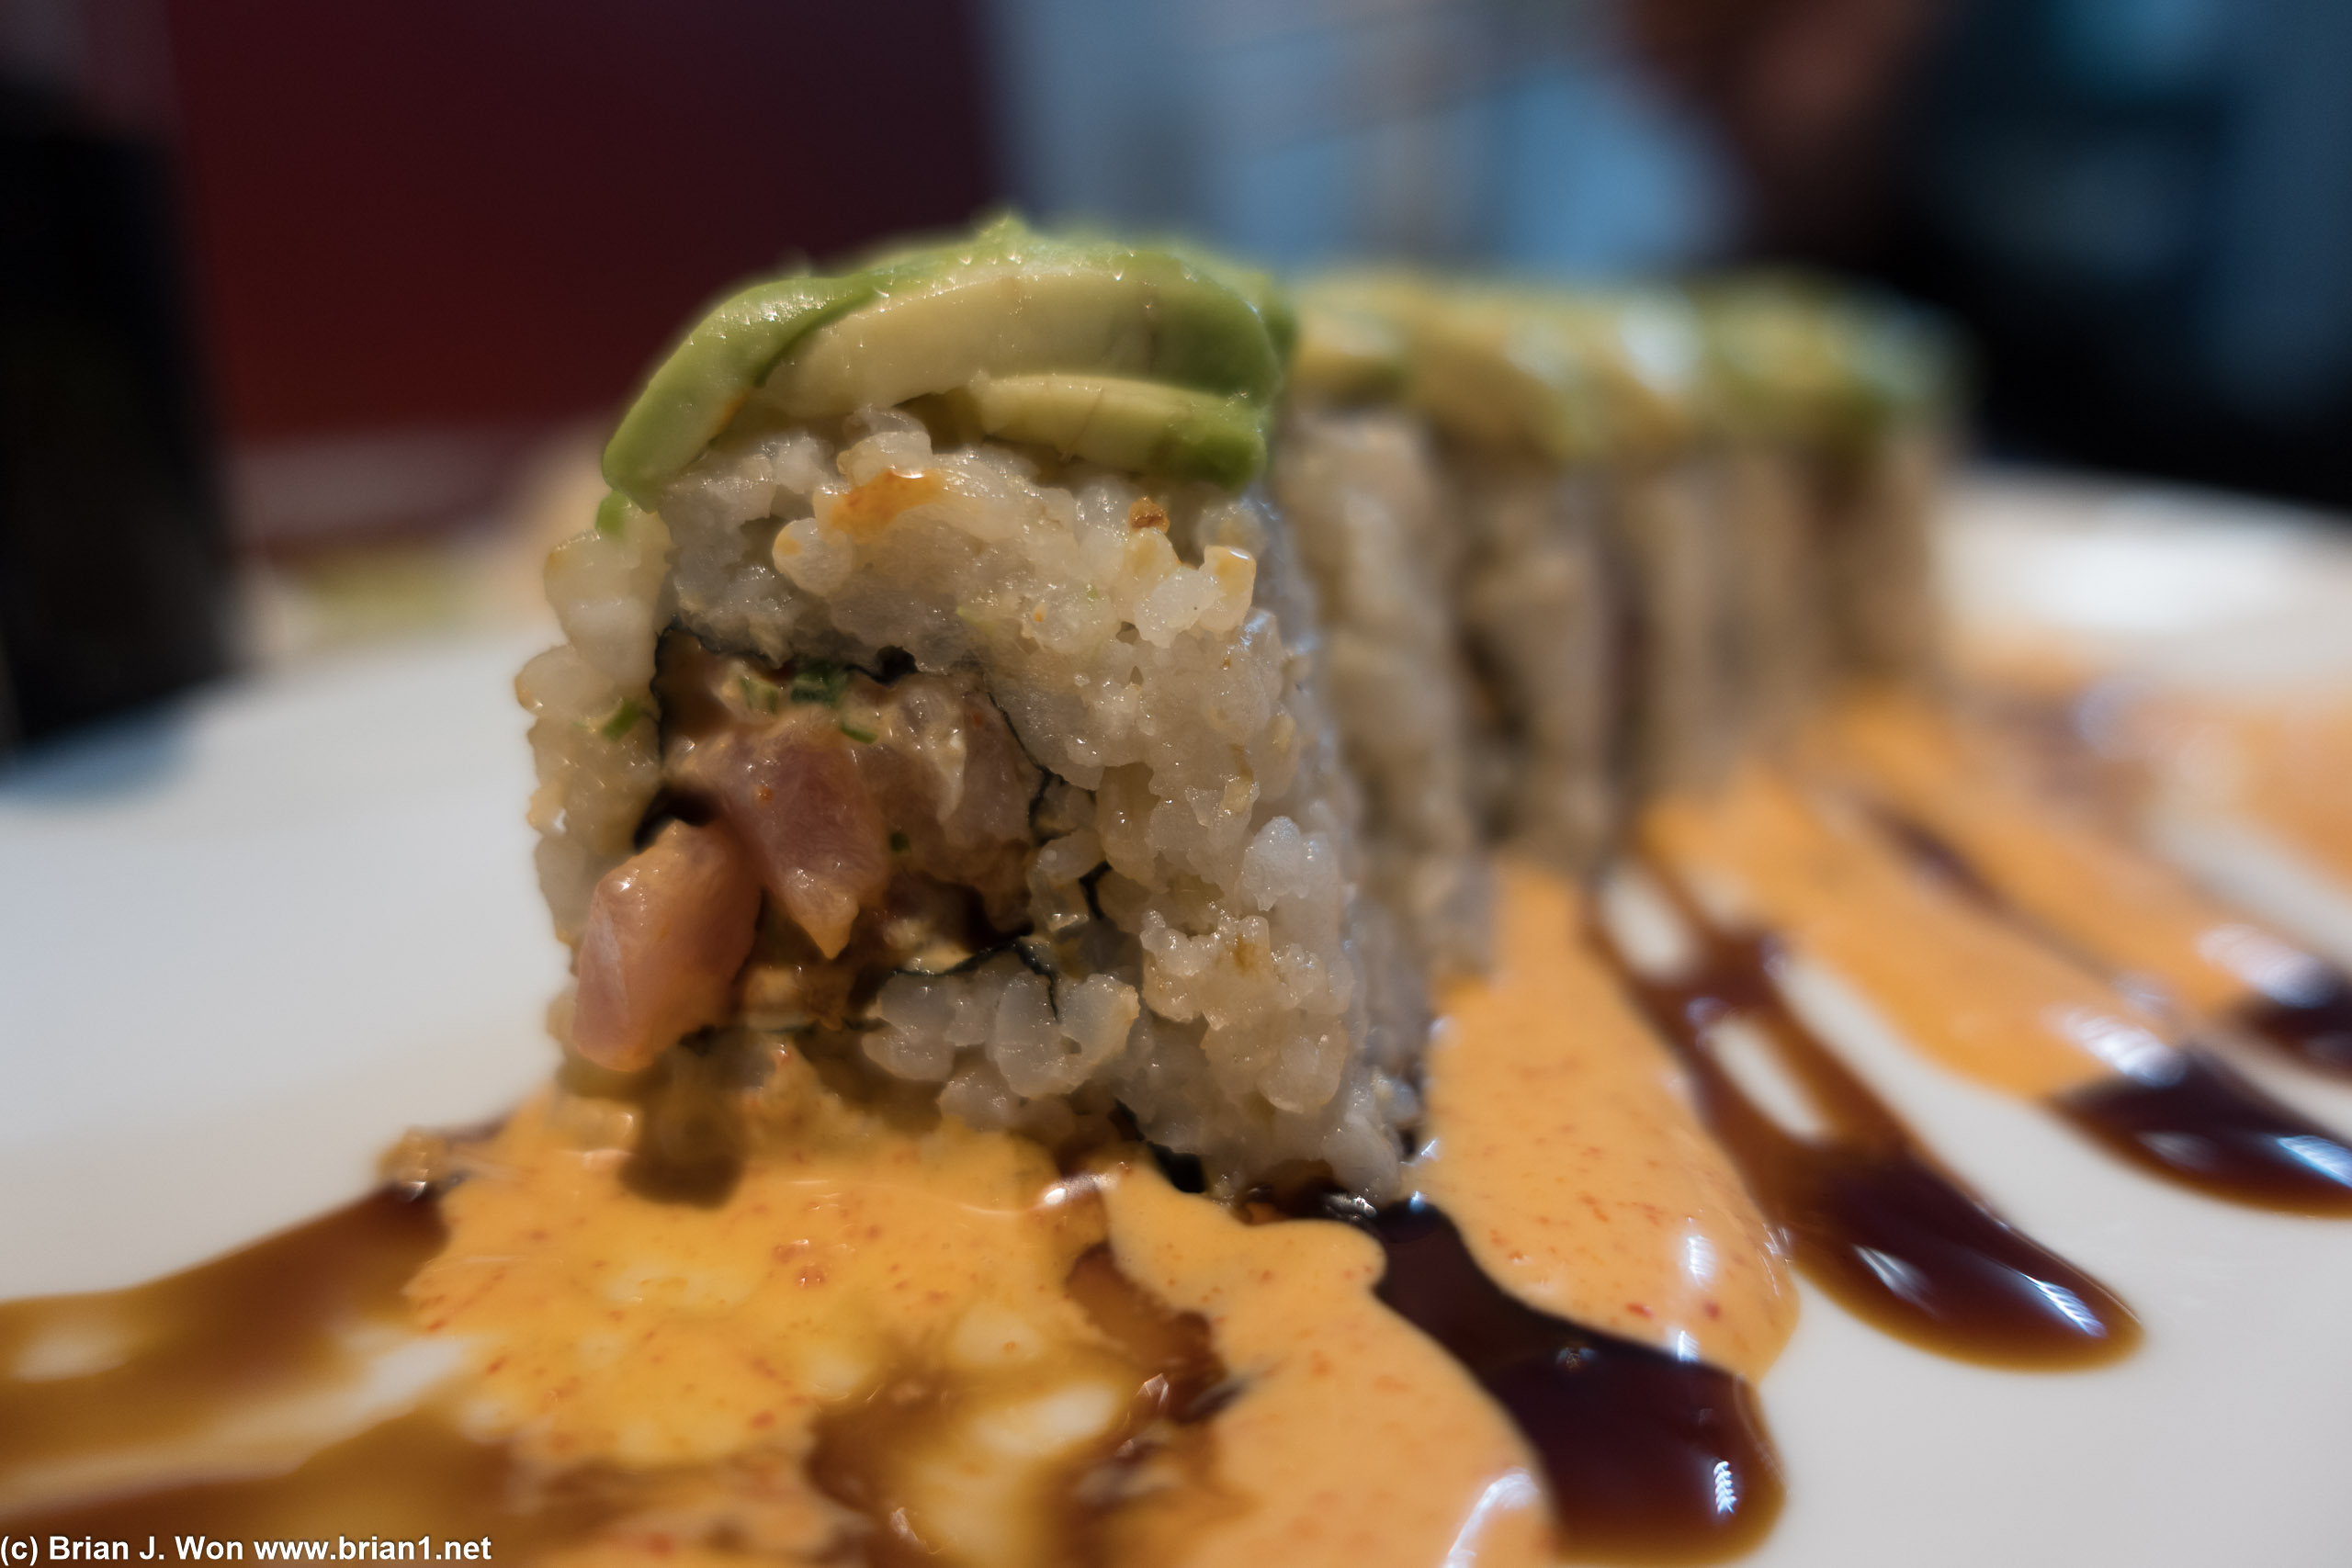 Chewbacca roll: not much taste from the yellowtail-- overwhelmed from the spicy mayo, unagi sauce, and avocado.